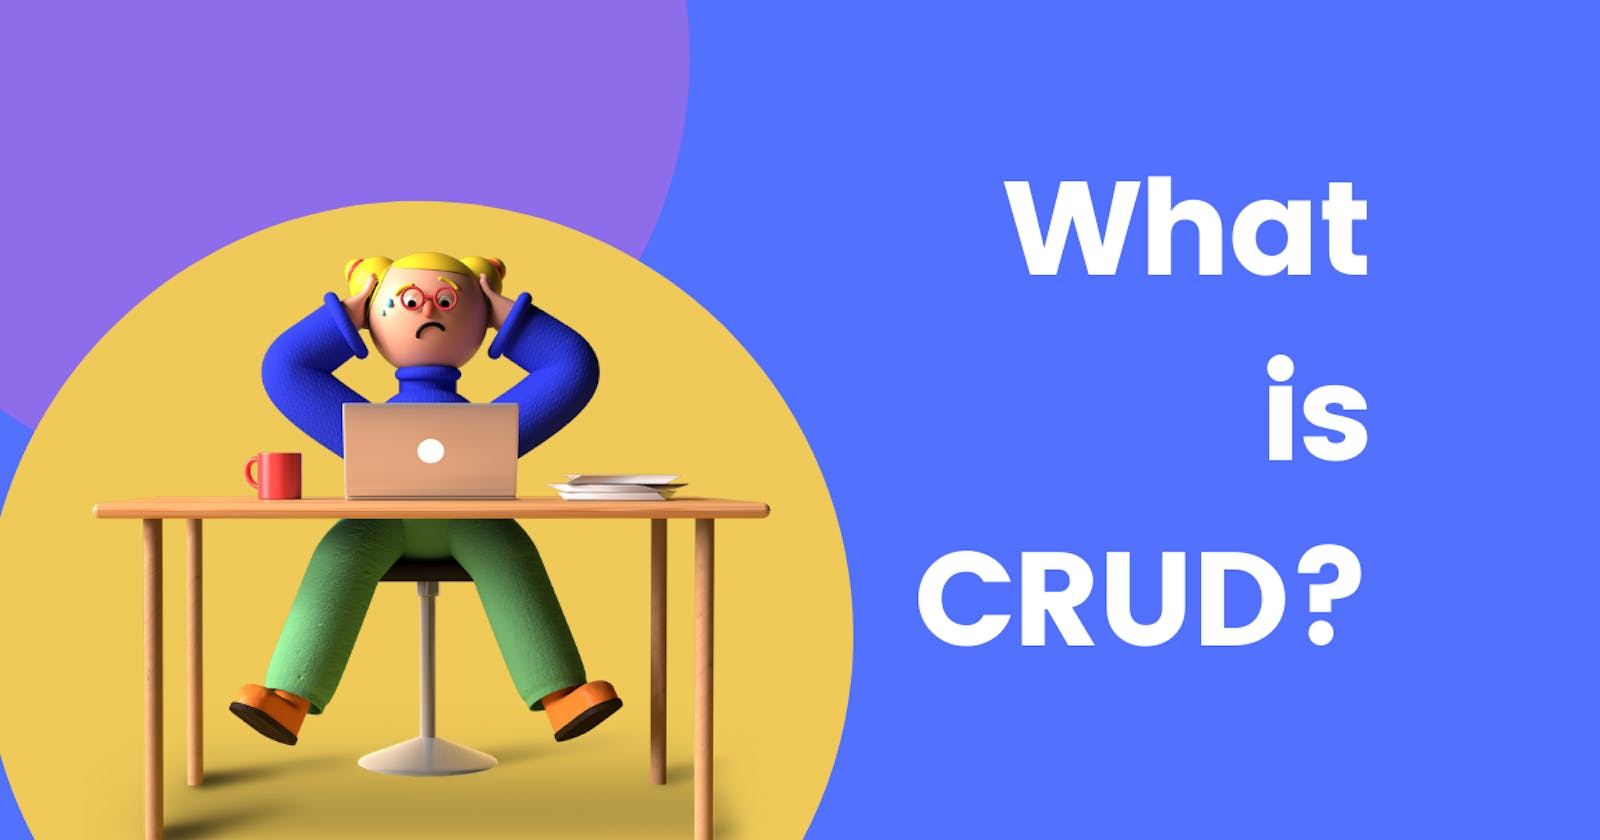 What is CRUD?